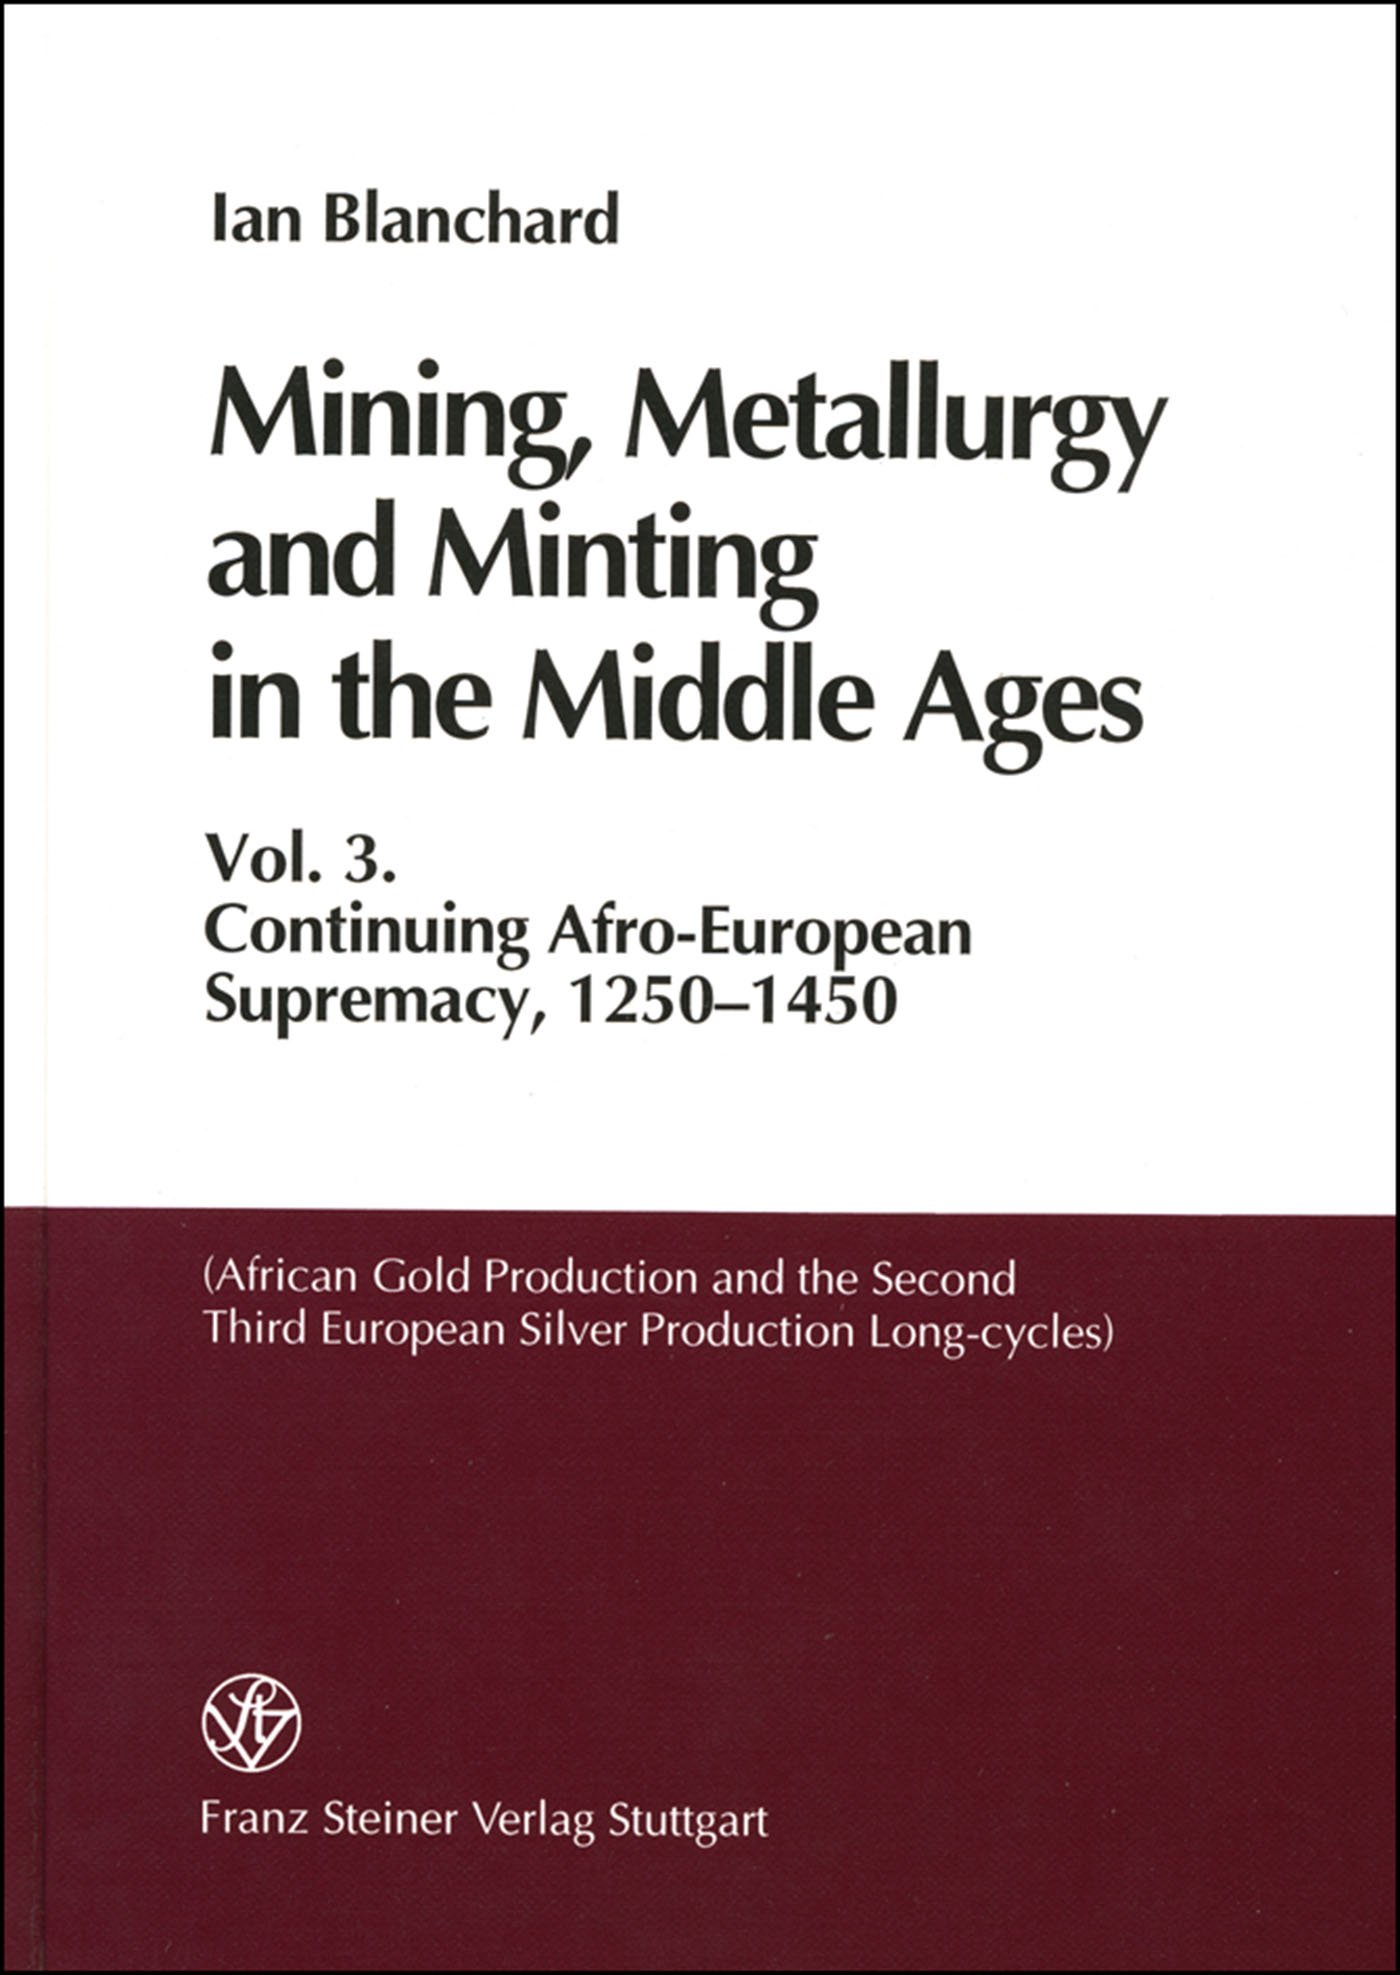 Mining, Metallurgy and Minting in the Middle Ages. Vol. 3